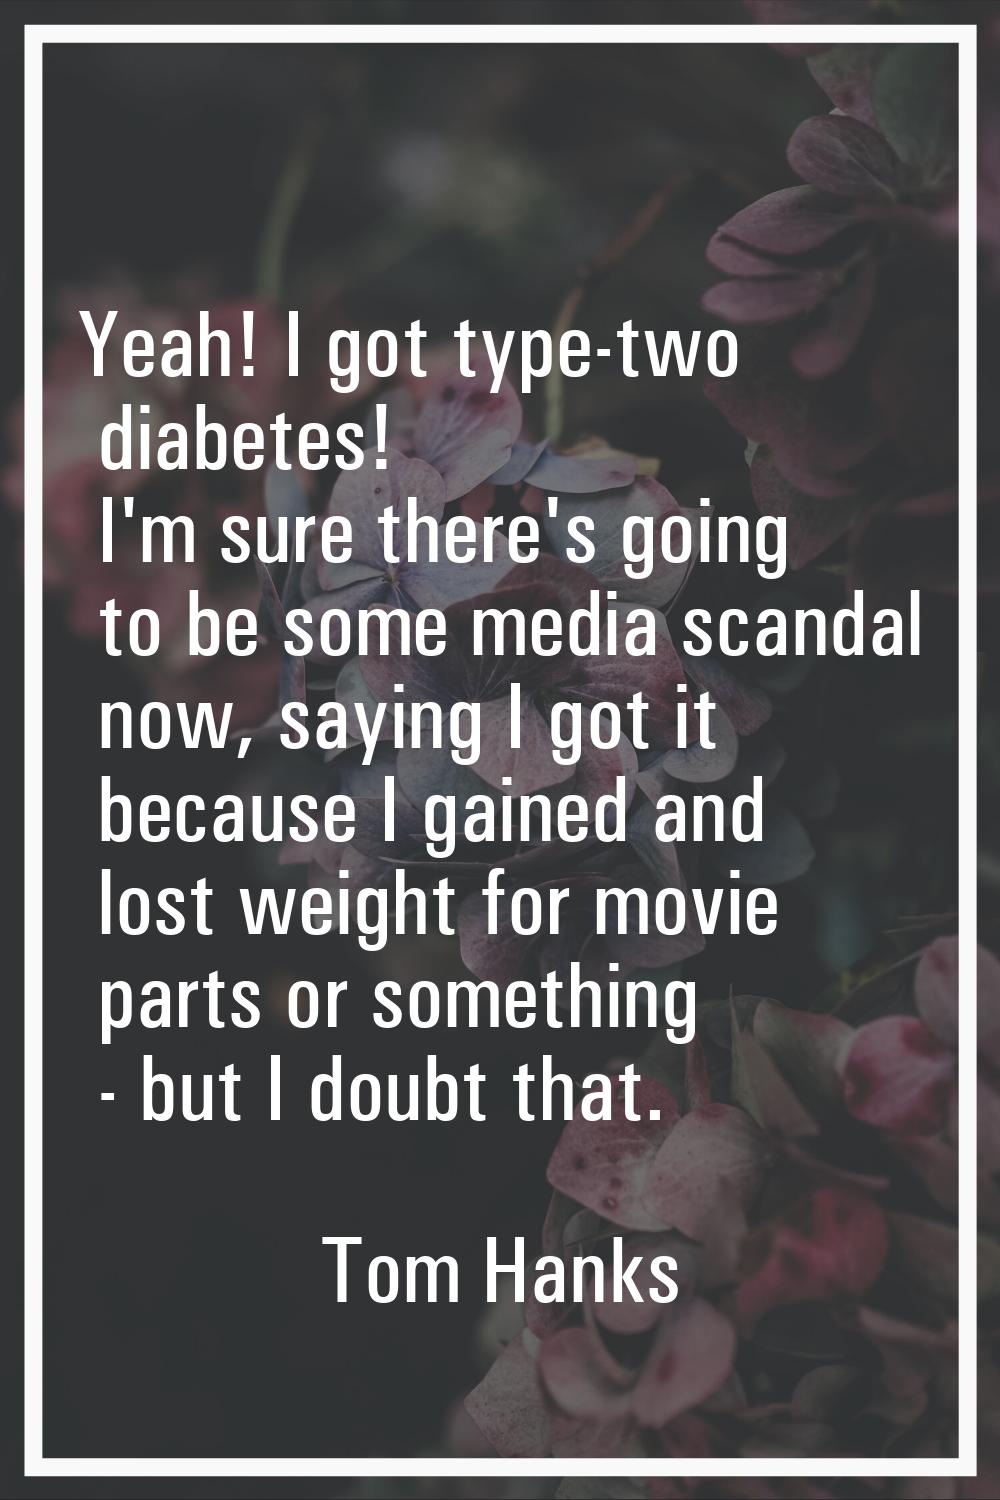 Yeah! I got type-two diabetes! I'm sure there's going to be some media scandal now, saying I got it